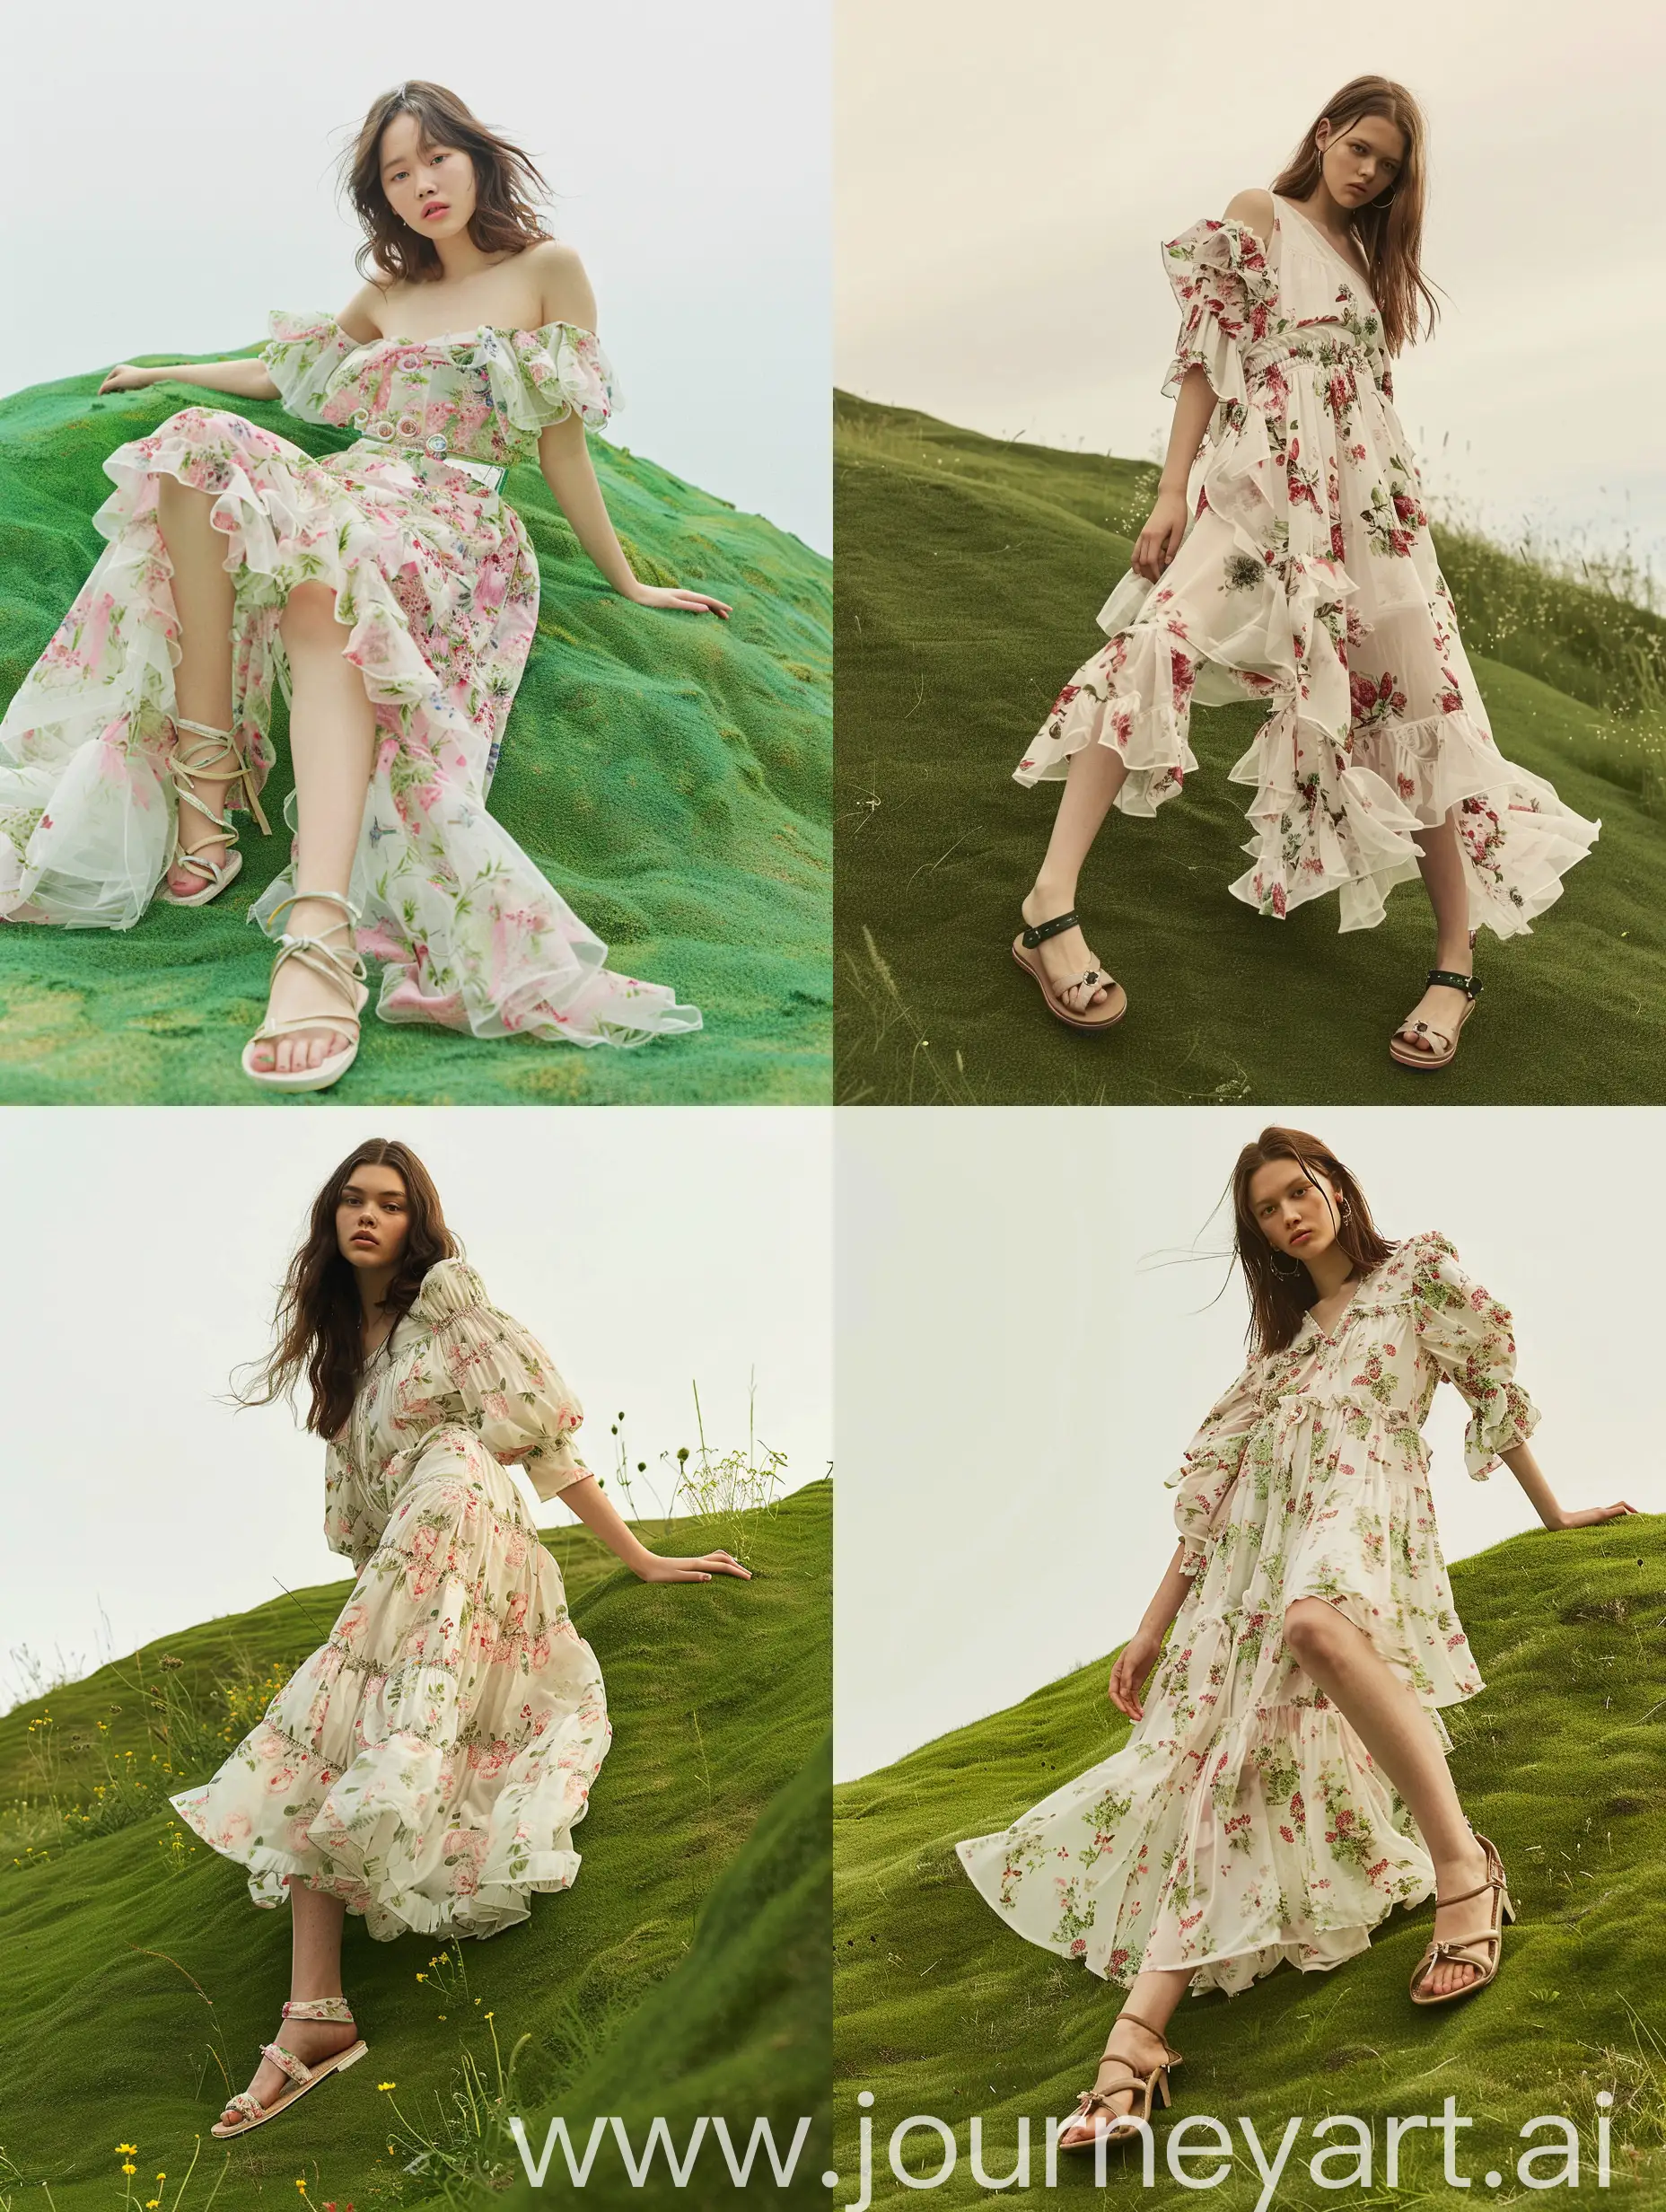 Romantic-Woman-in-Floral-Dress-Poses-on-Green-Hill